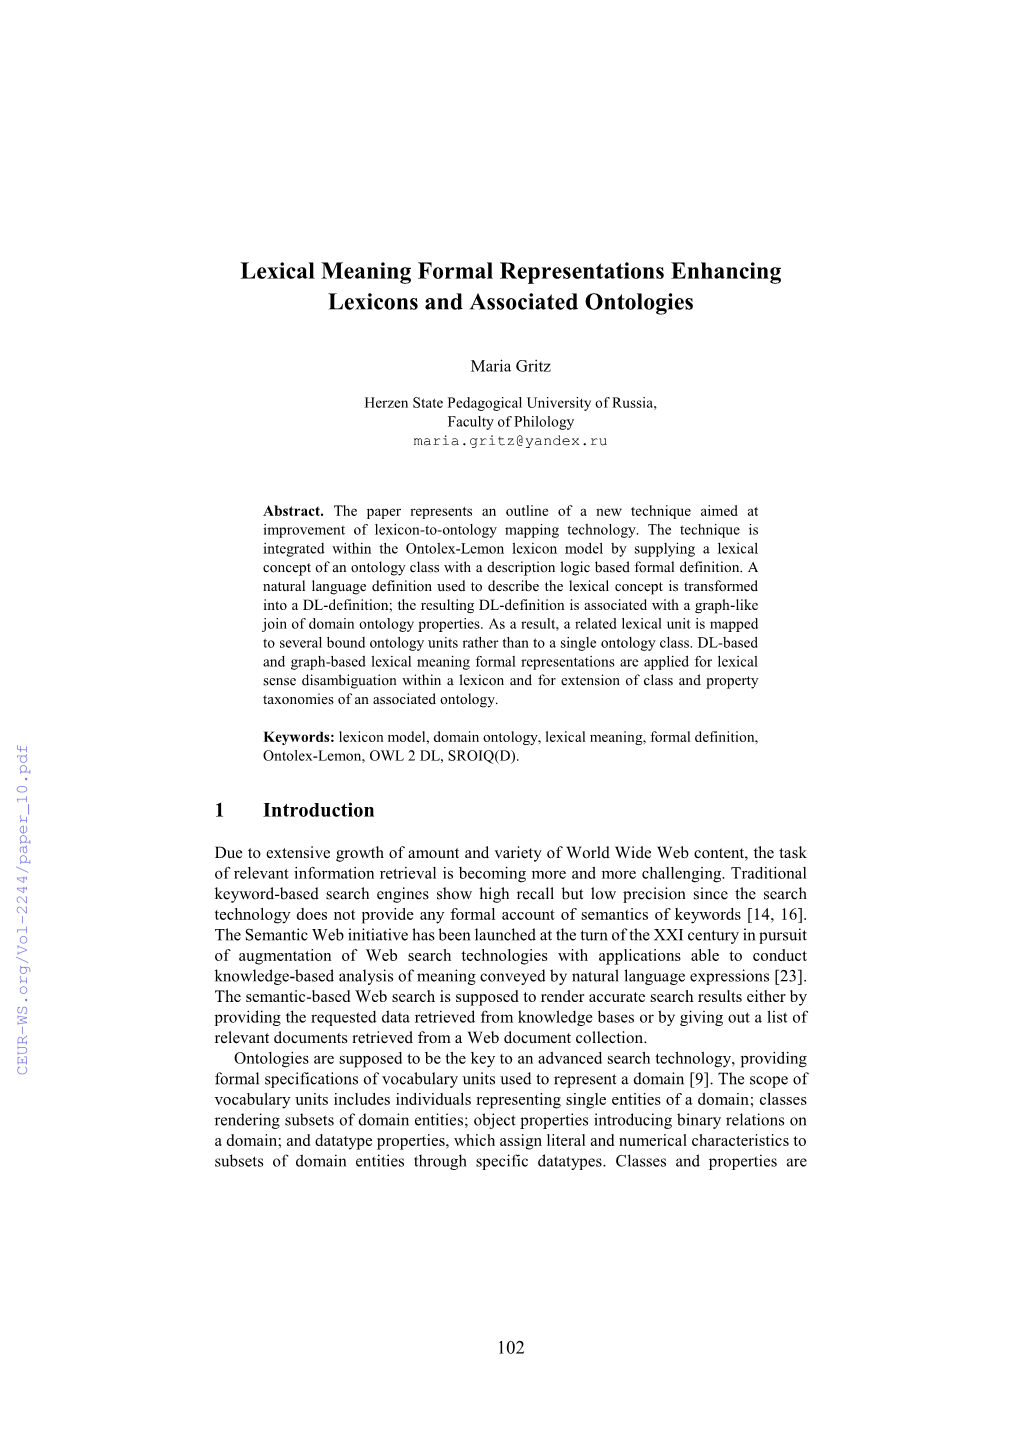 Lexical Meaning Formal Representations Enhancing Lexicons and Associated Ontologies